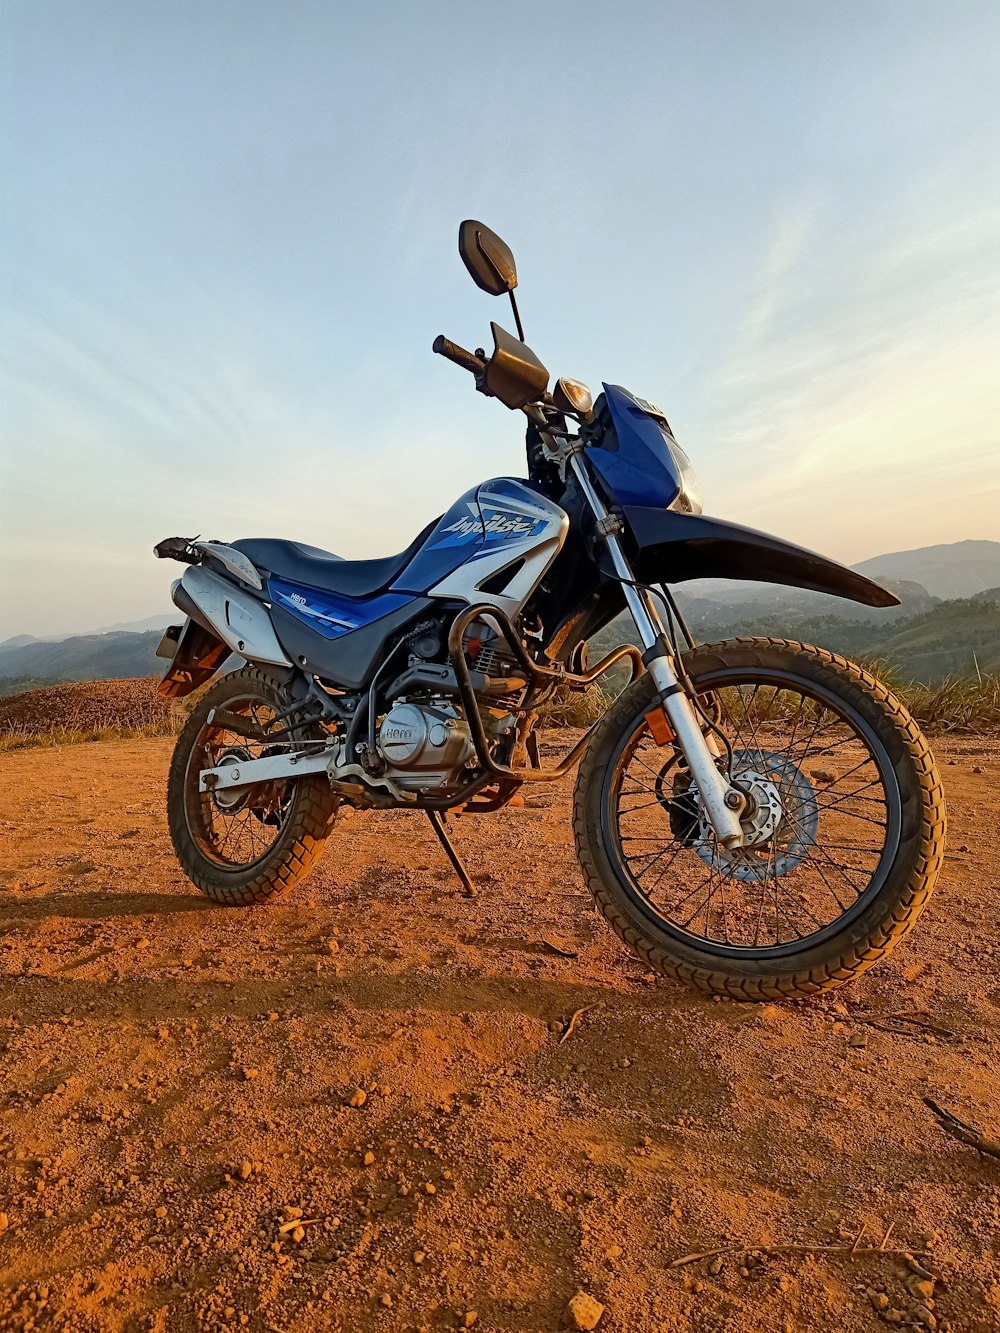 blue and black naked motorcycle on brown sand under white cloudy sky during daytime